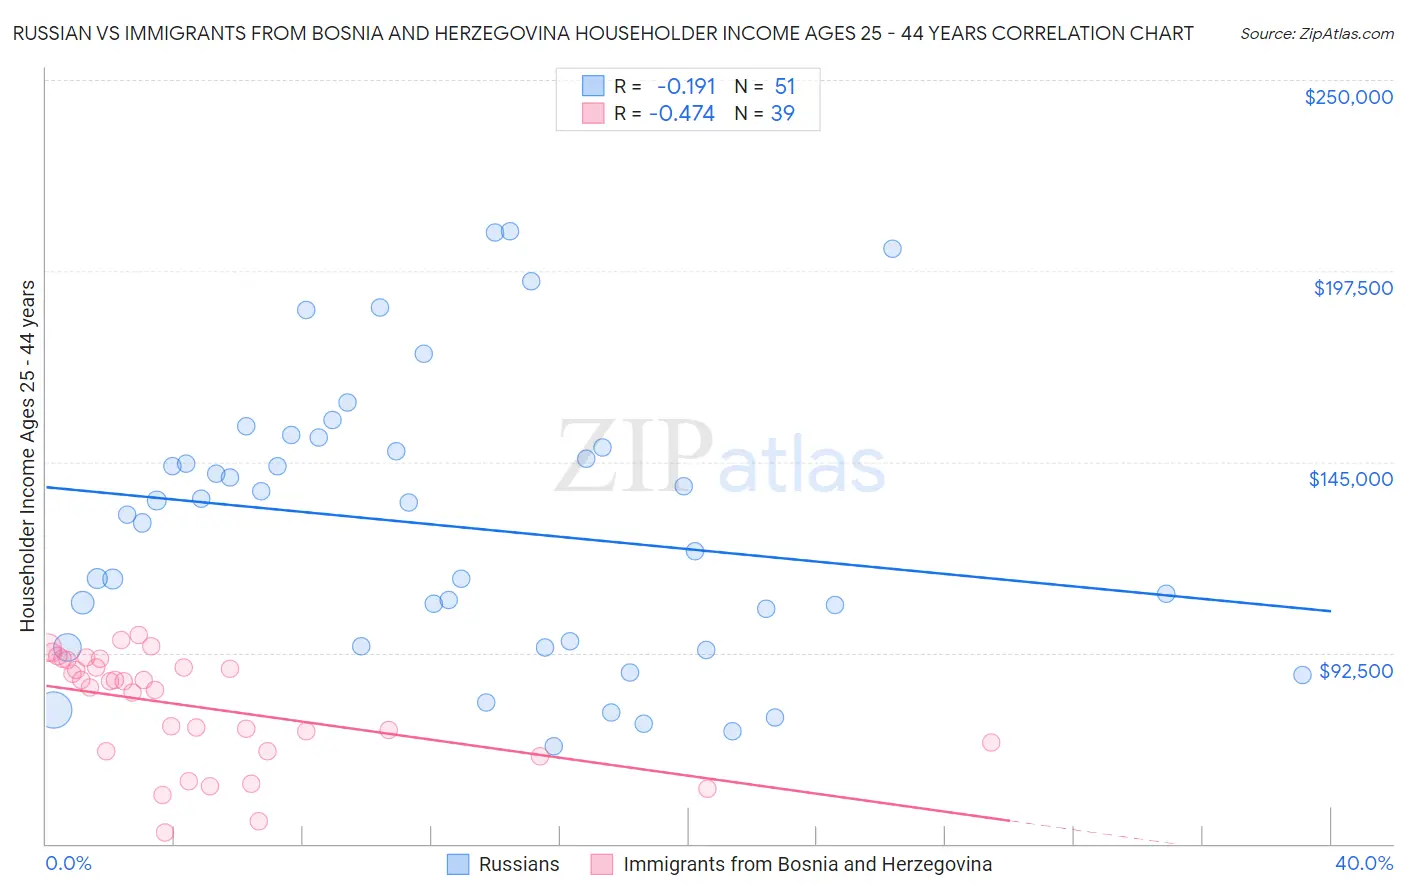 Russian vs Immigrants from Bosnia and Herzegovina Householder Income Ages 25 - 44 years